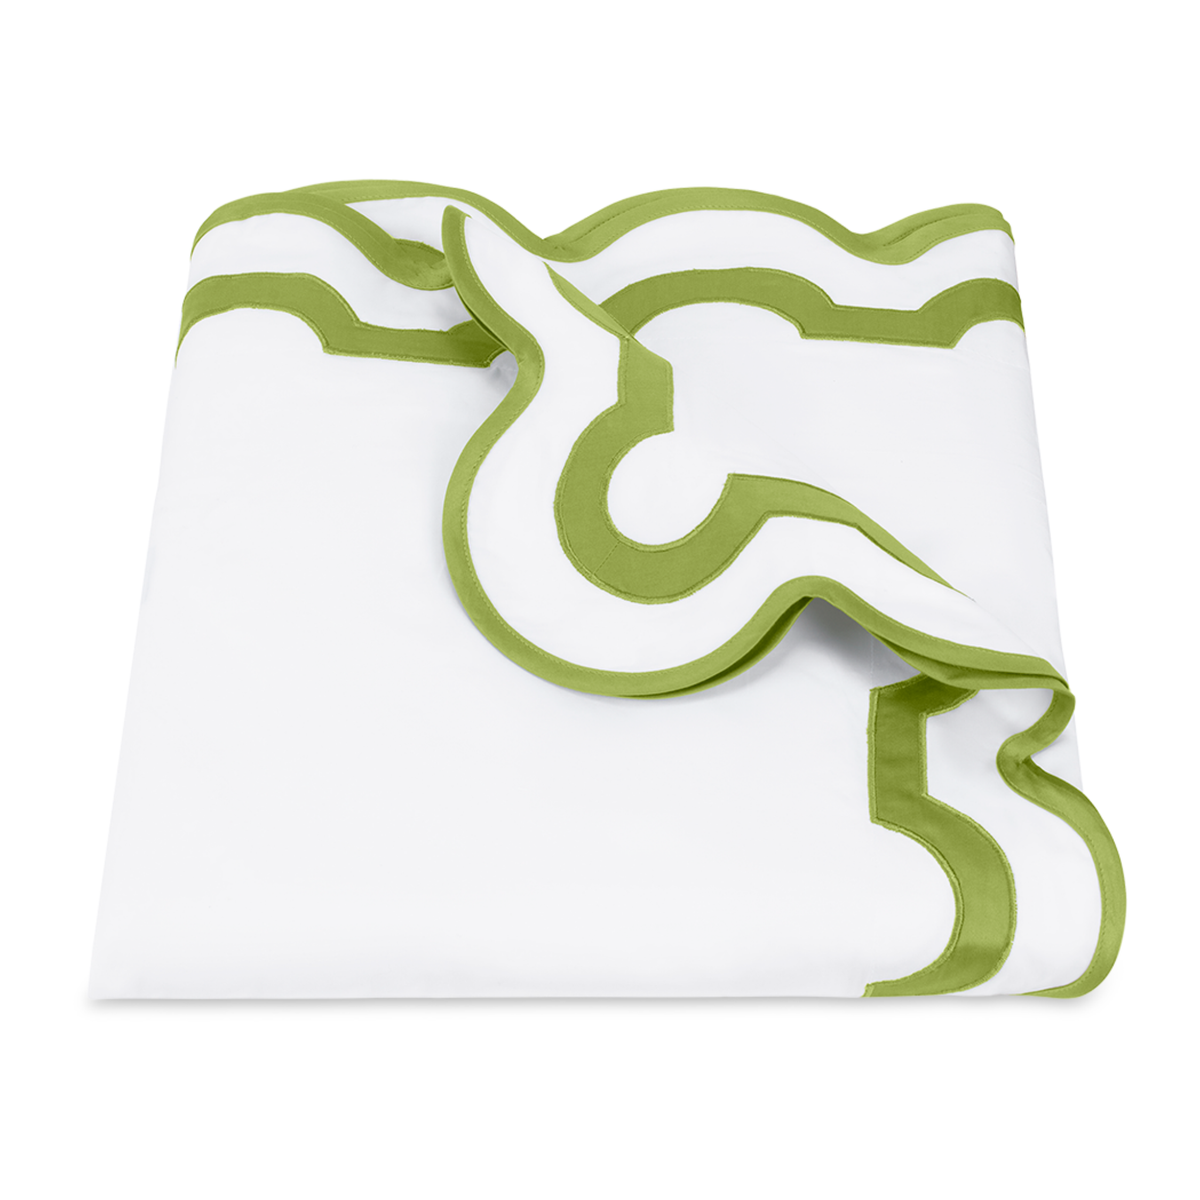 Folded Duvet Cover of Matouk Mirasol Collection in Grass Color